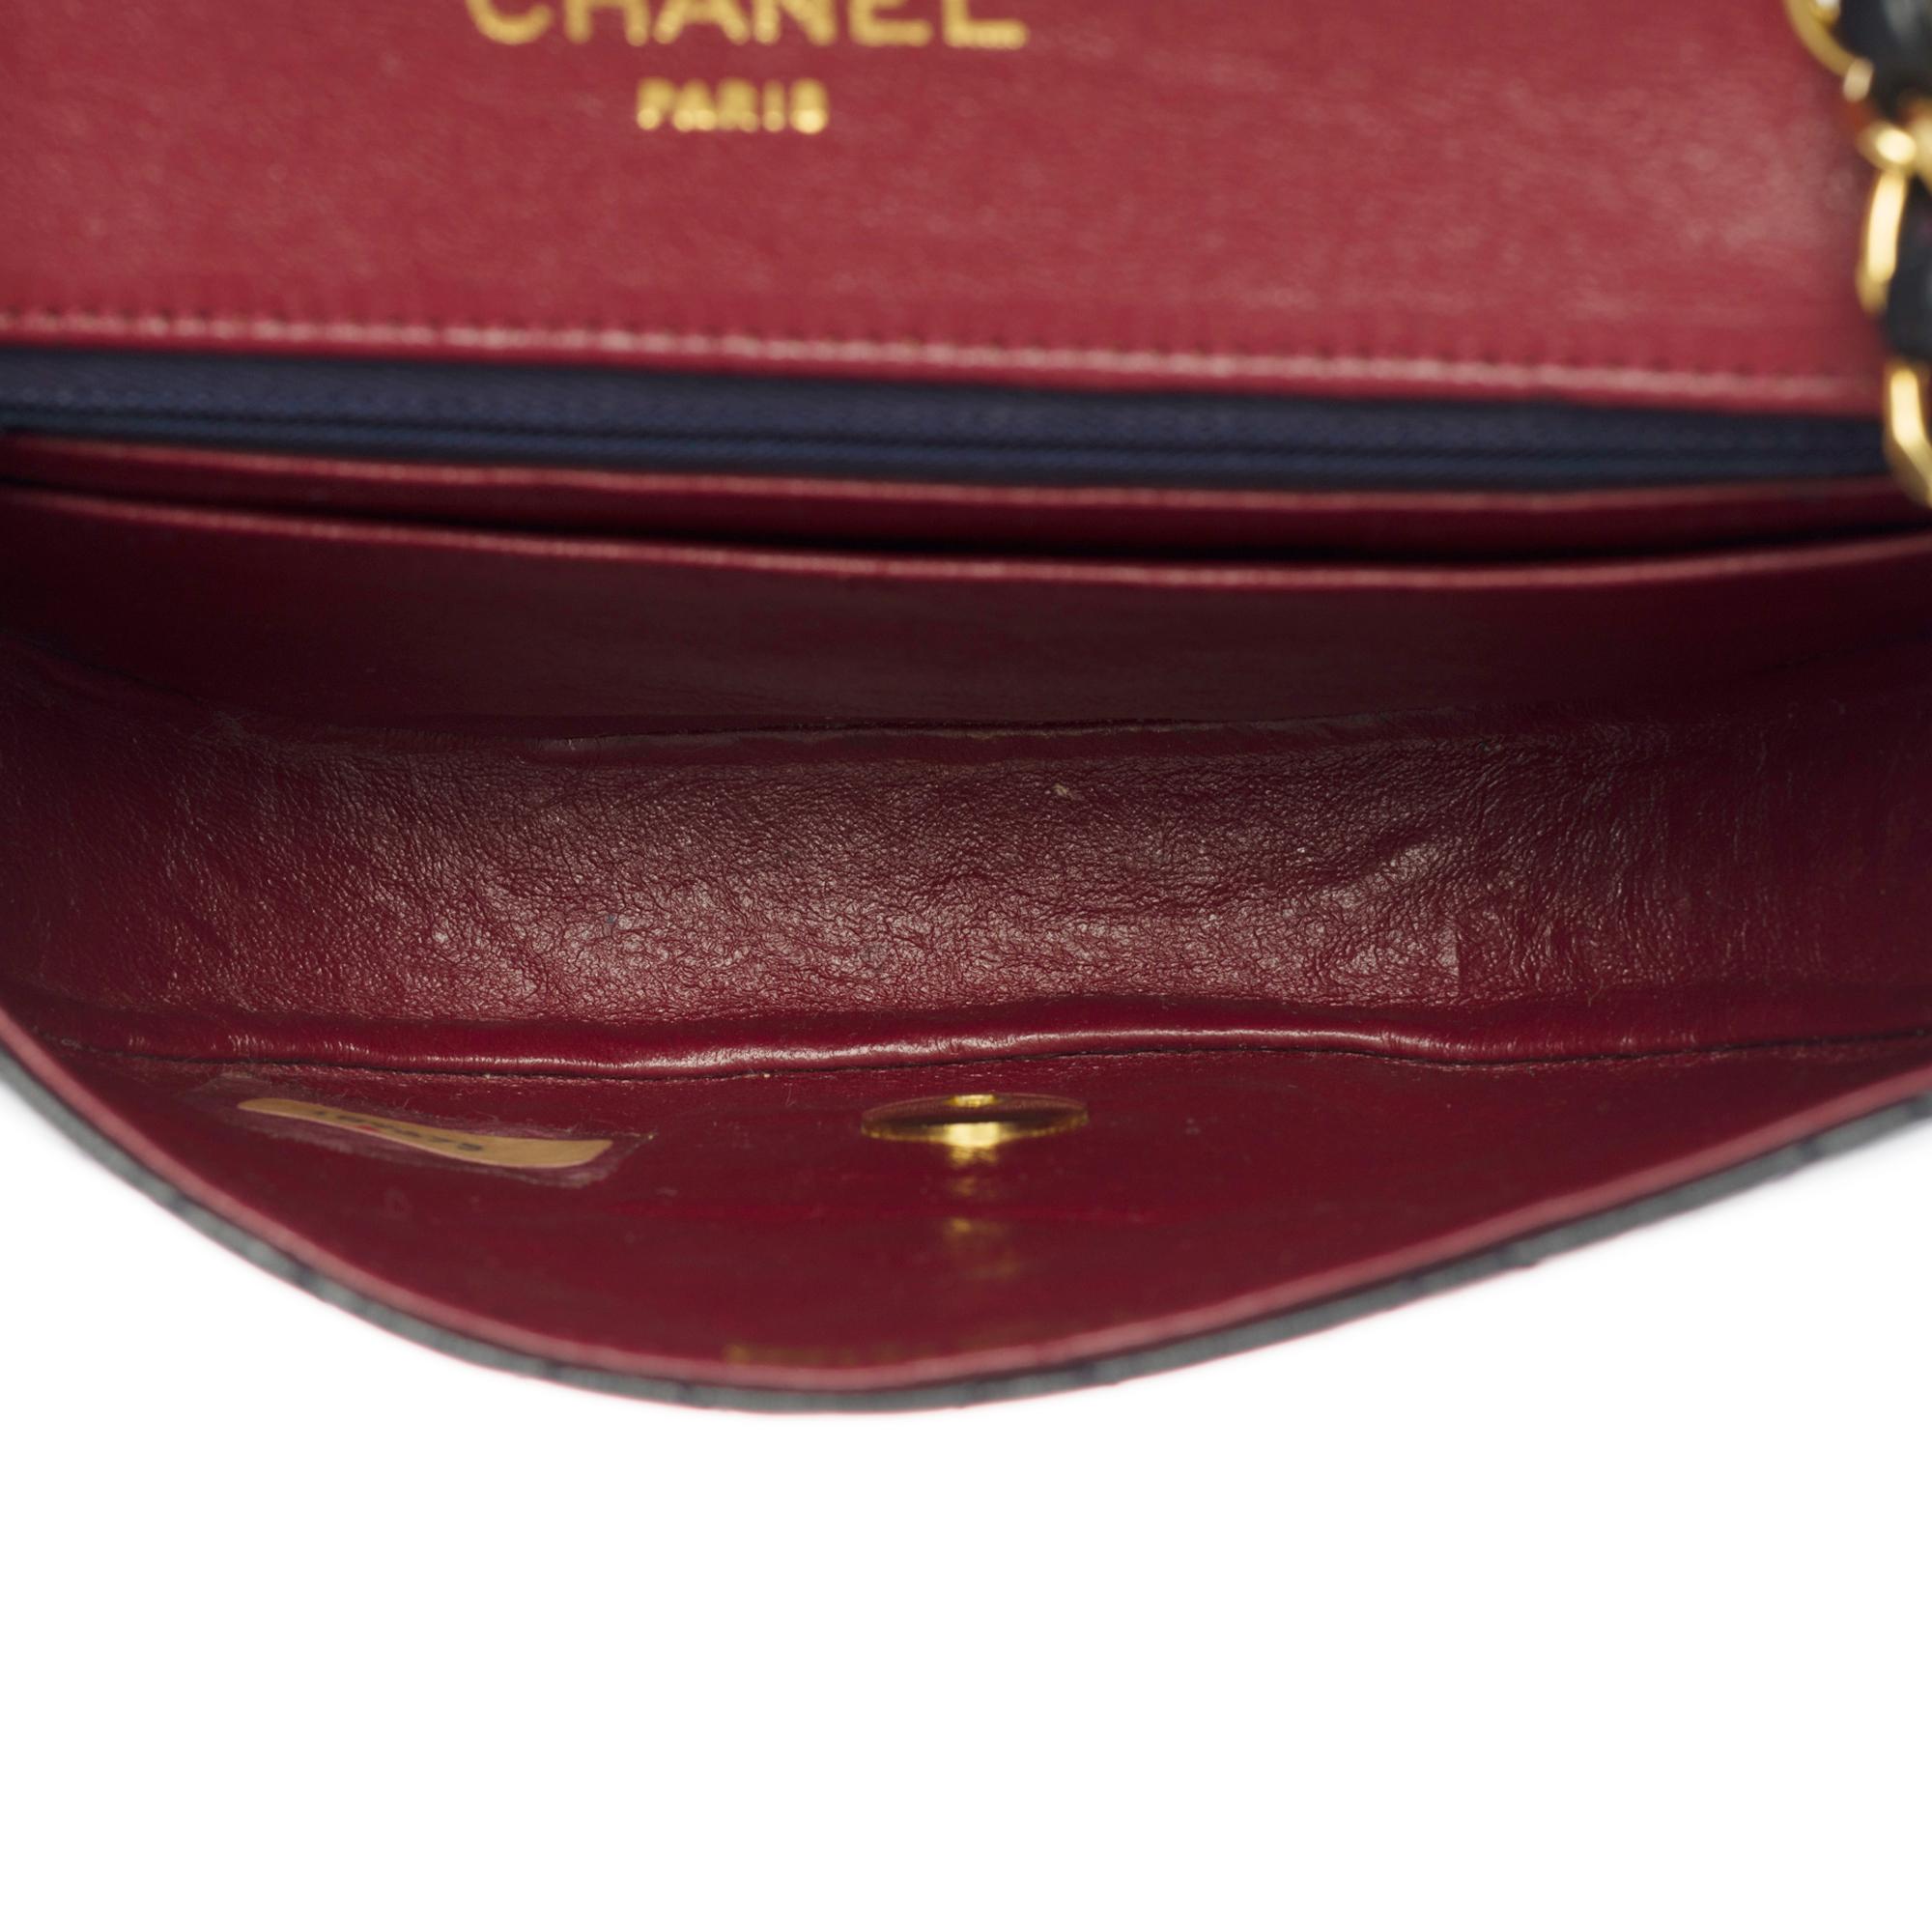 Chanel Classic Demi-Lune shoulder Flap bag in navy blue quilted lamb leather, GHW 1